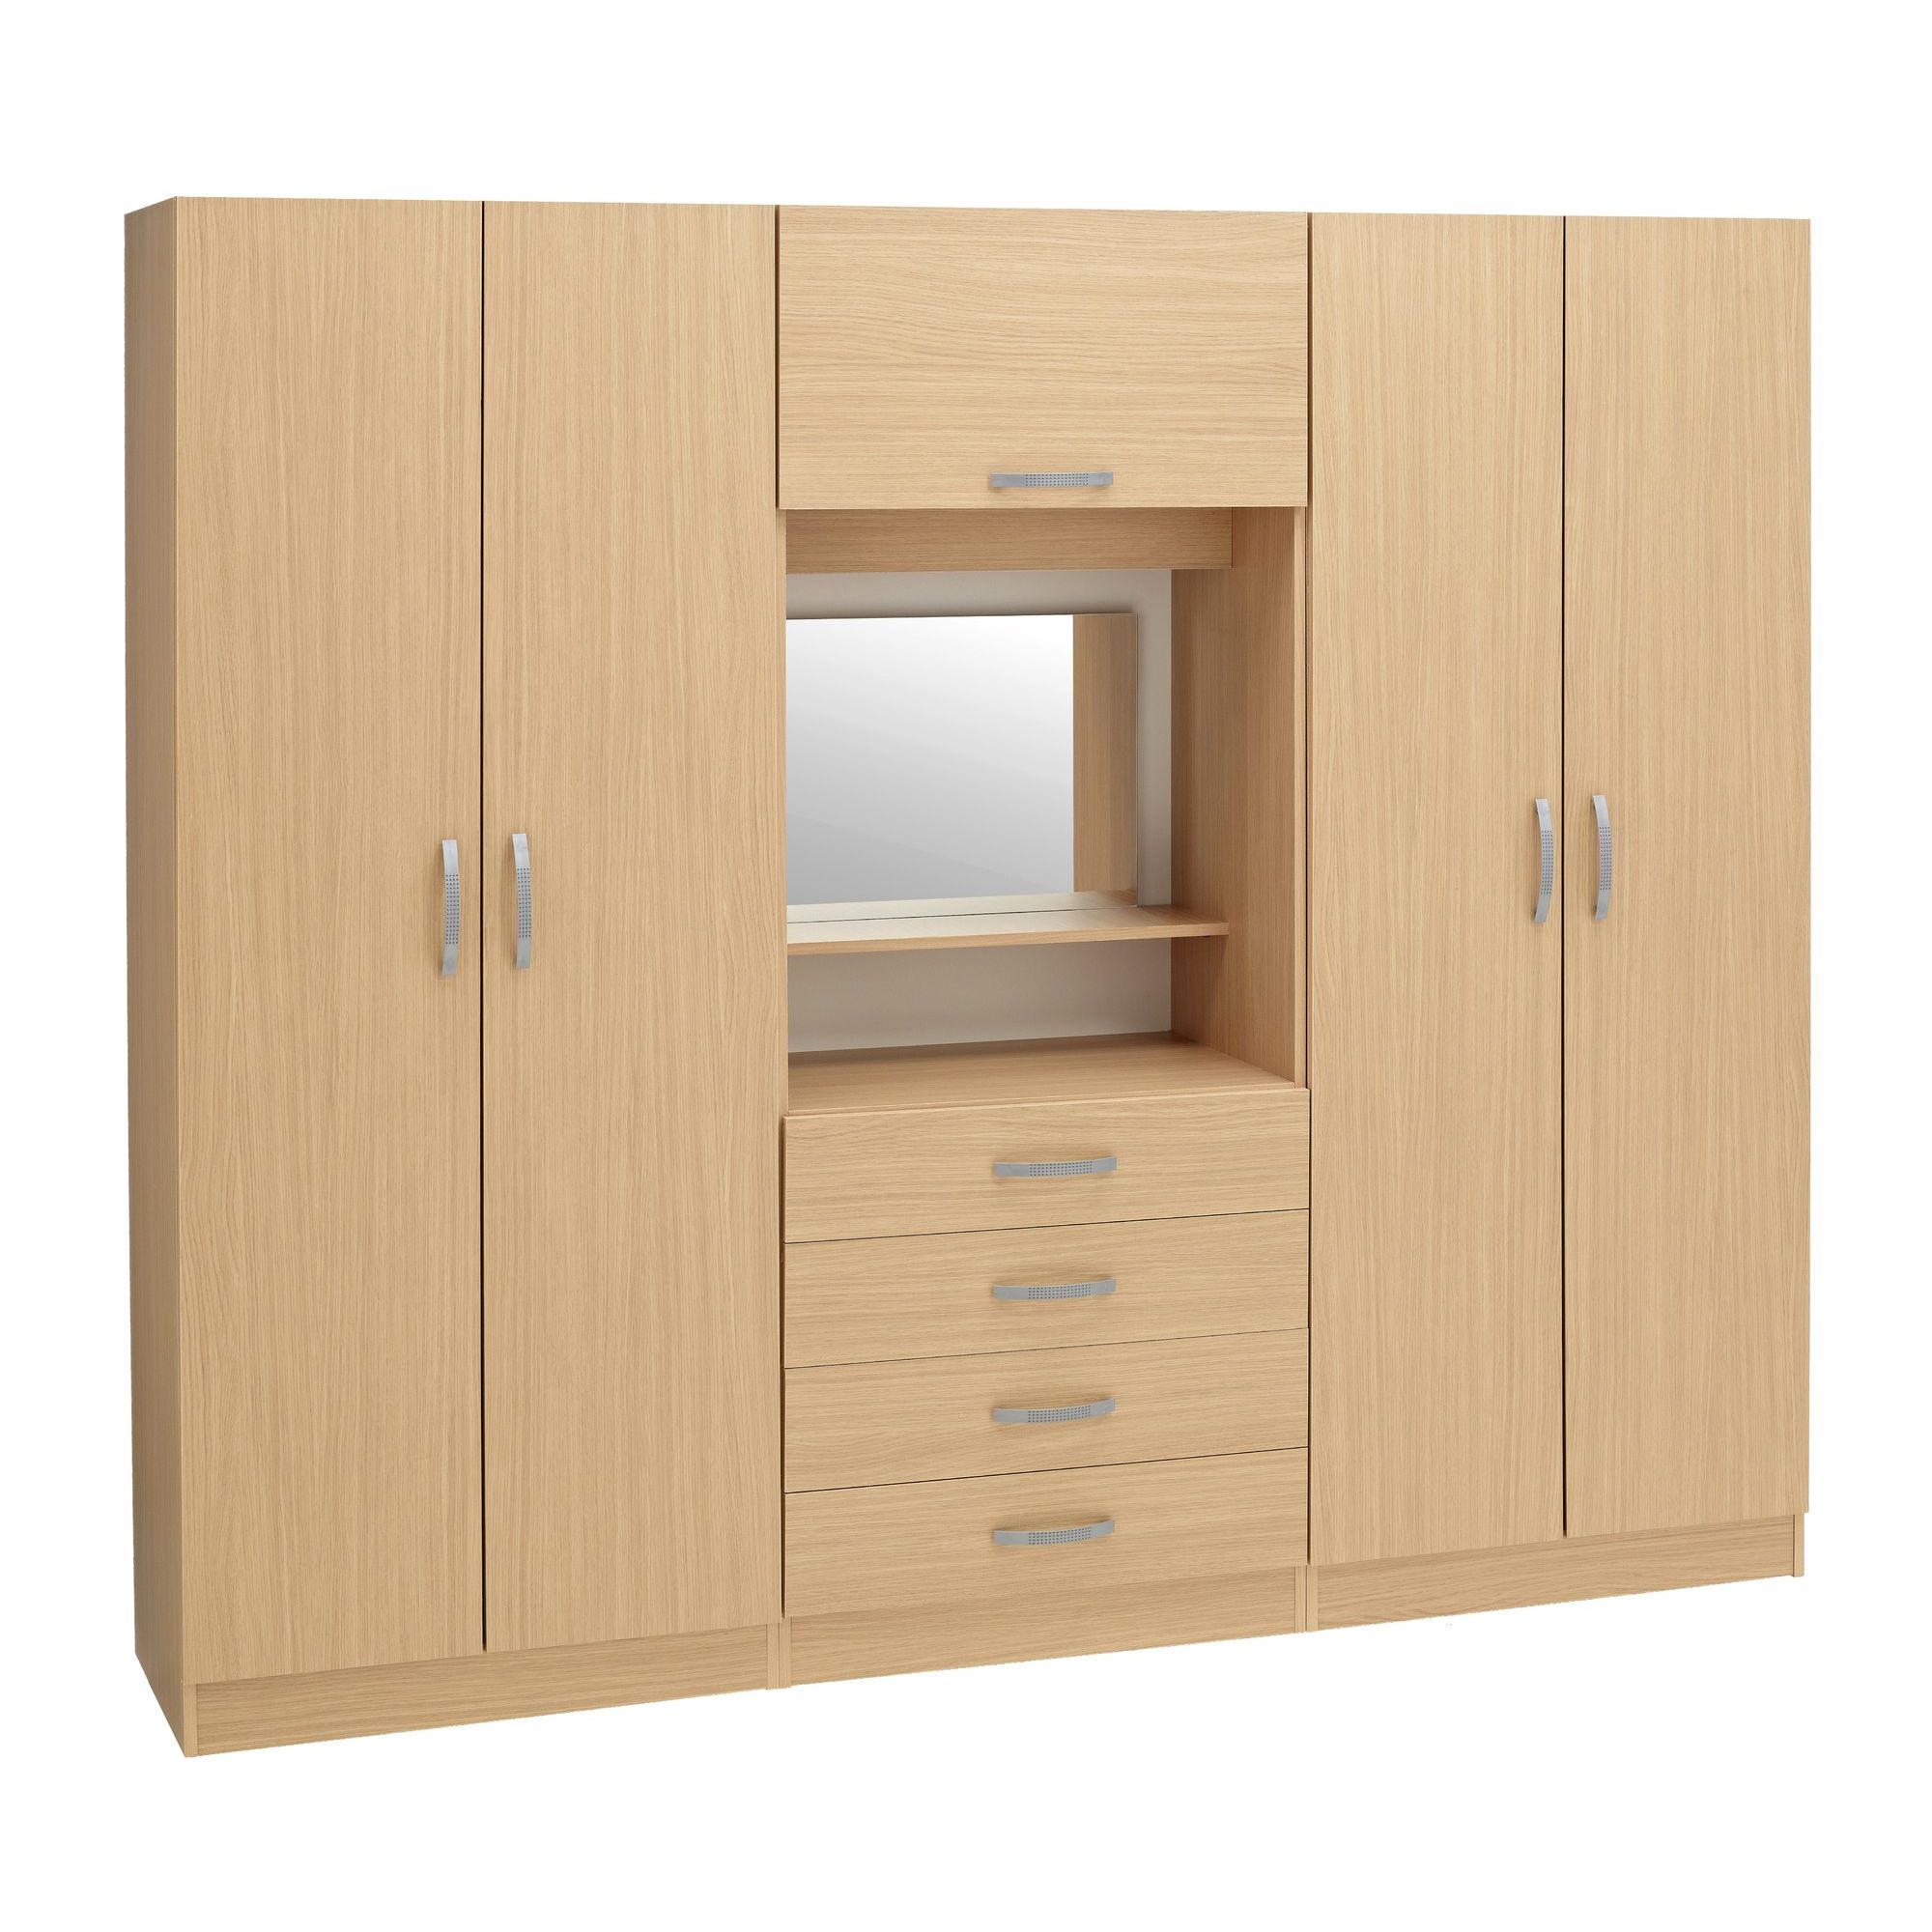 Ideal Furniture Budapest 4 door Wardrobe with drawers - Oak at Tesco Direct